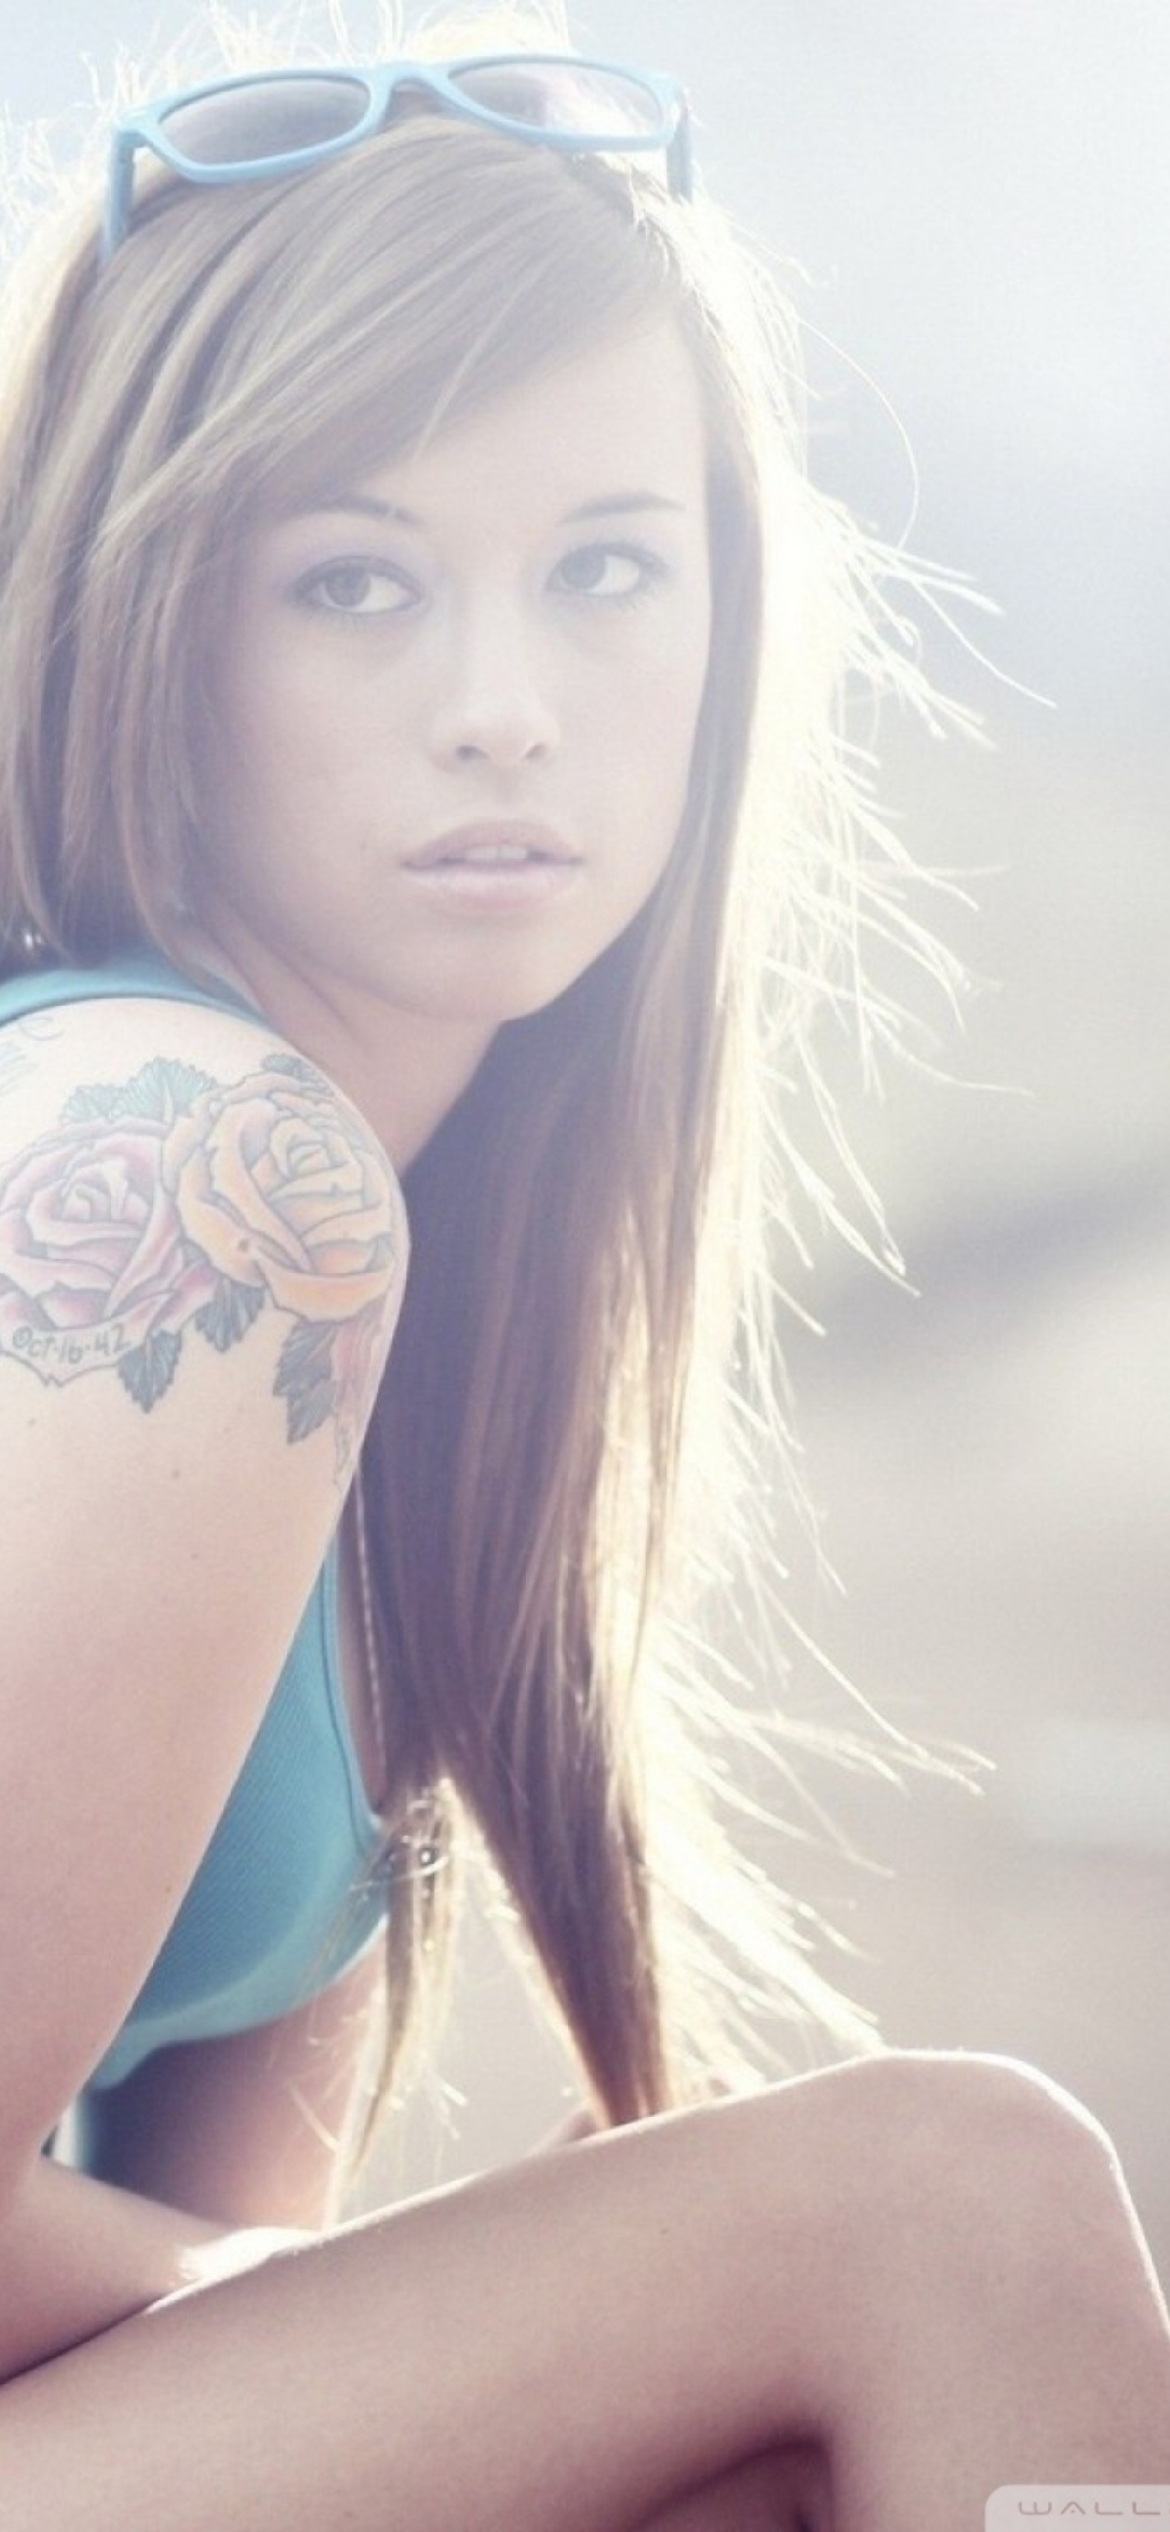 Das Beautiful Girl With Long Blonde Hair And Rose Tattoo Wallpaper 1170x2532